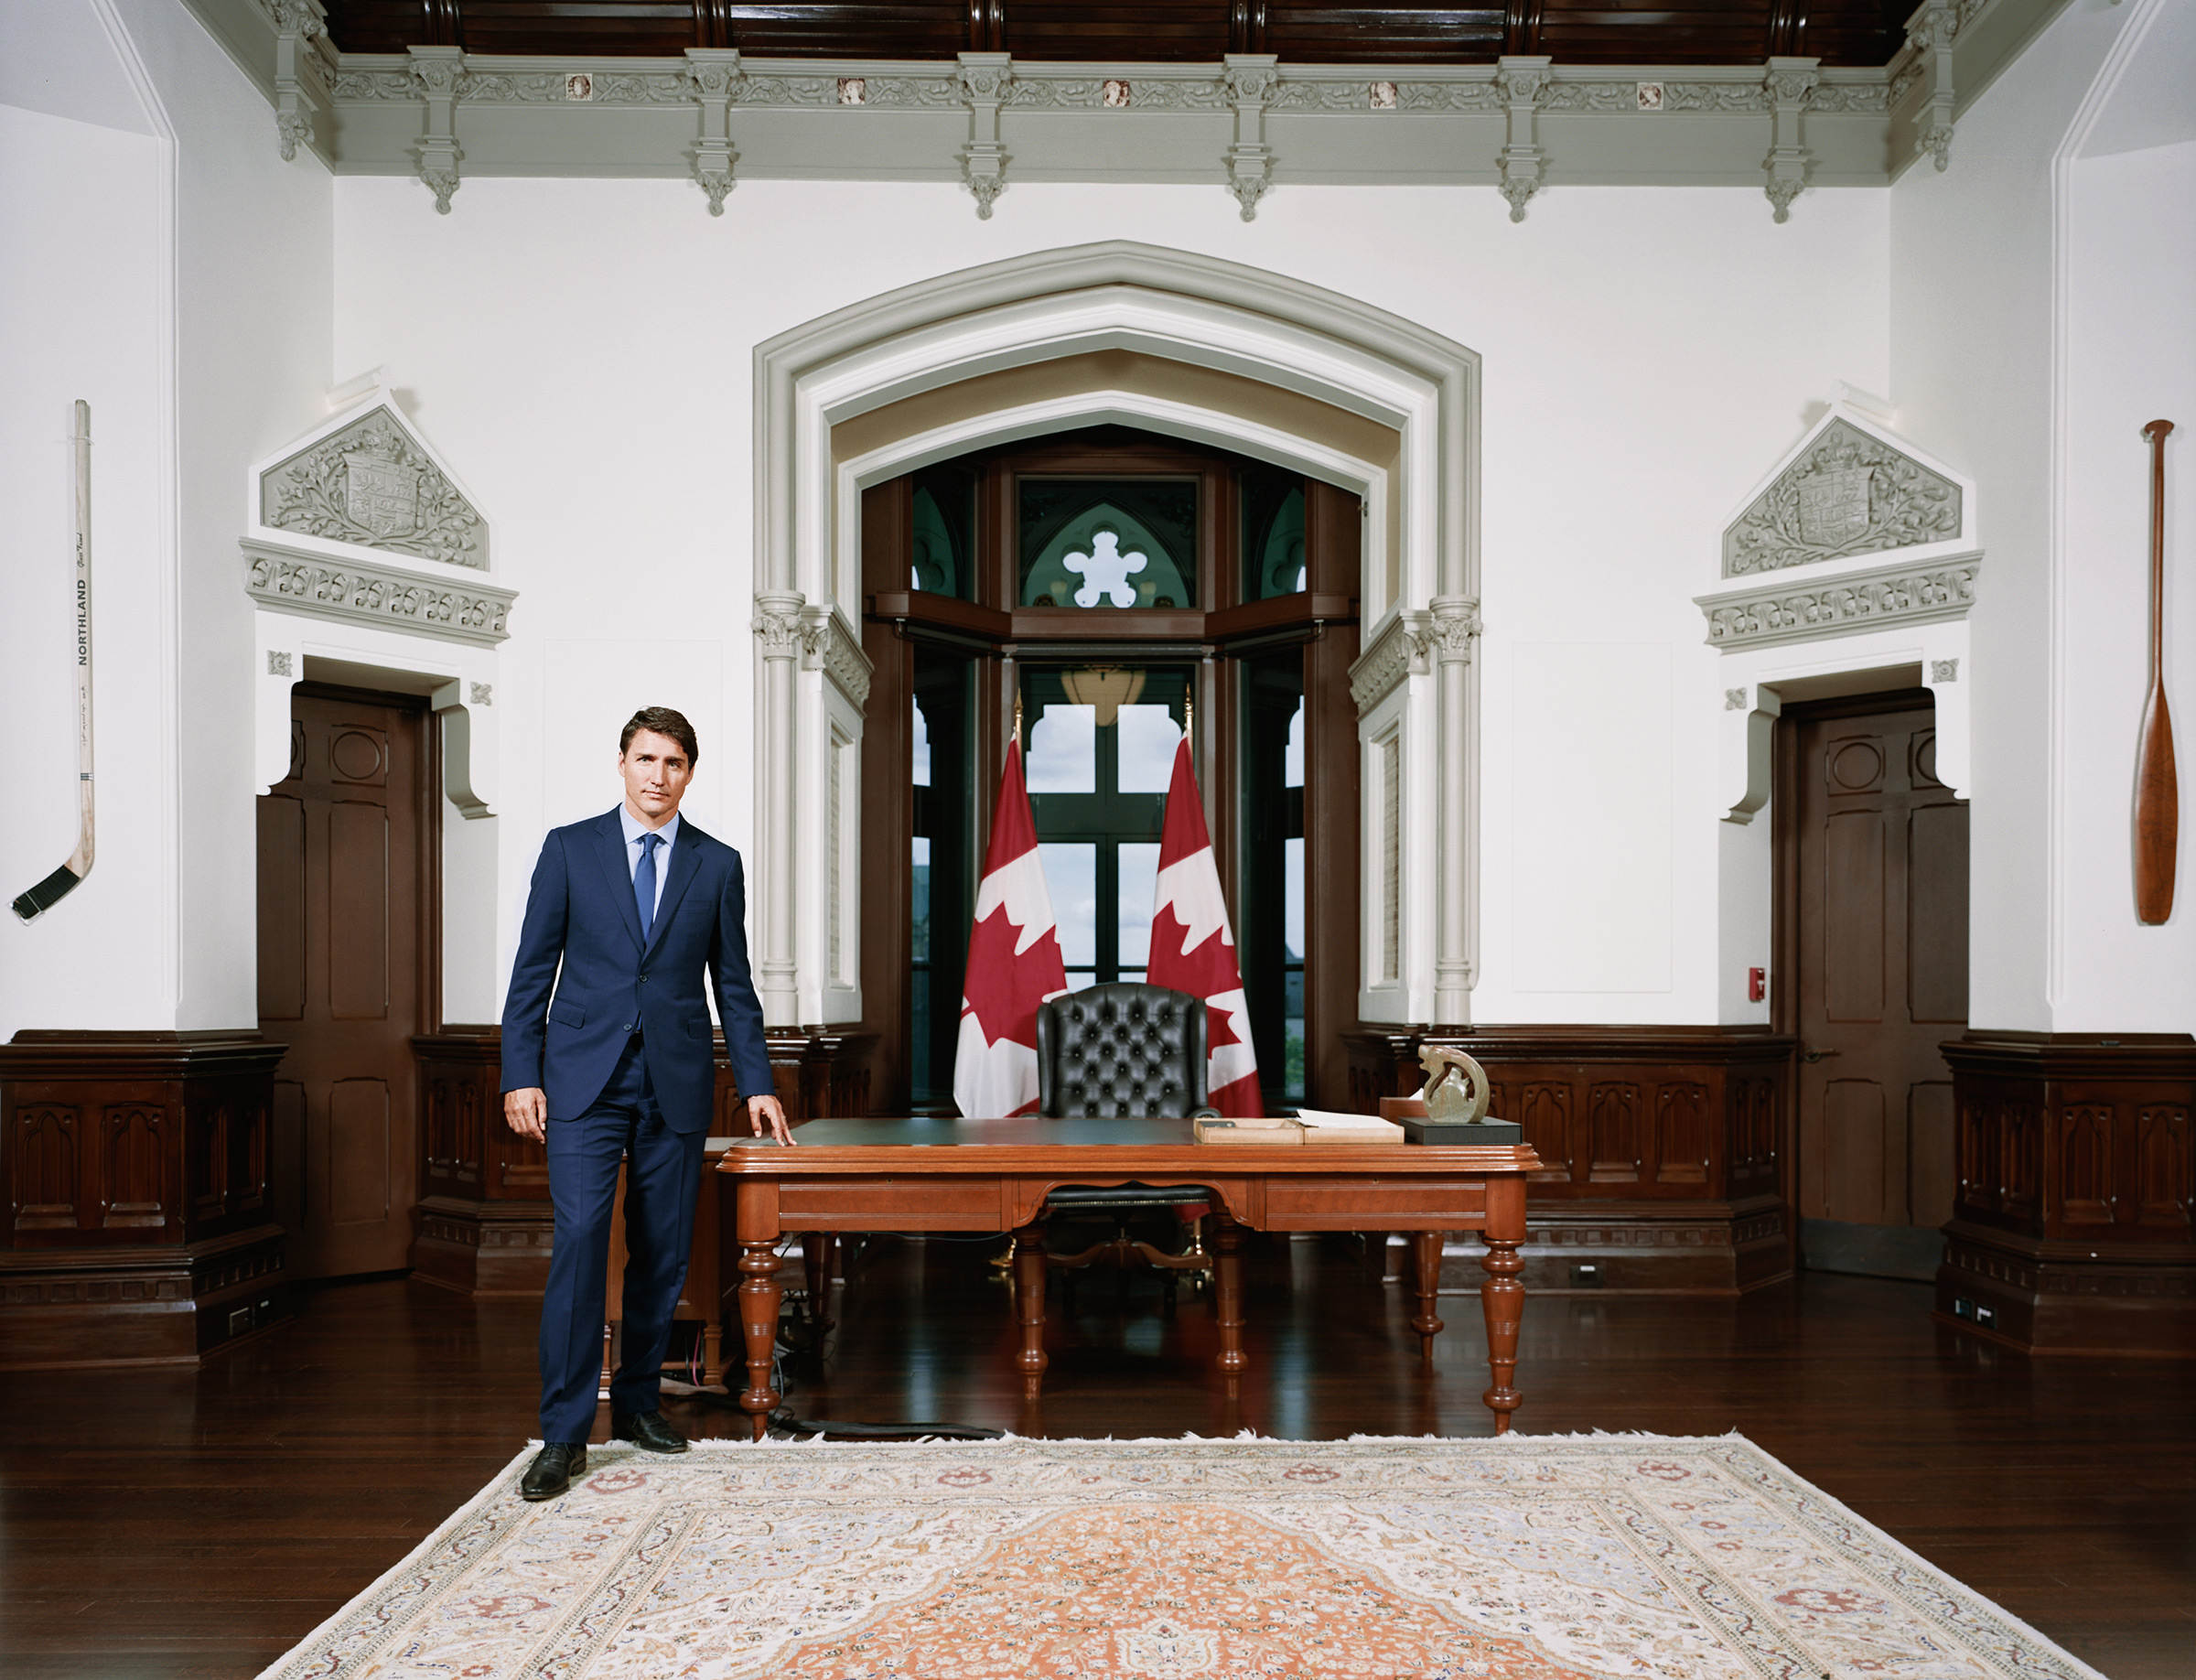 Trudeau in the Prime Minister’s office in Ottawa on Sept. 3 (Stefan Ruiz for TIME)